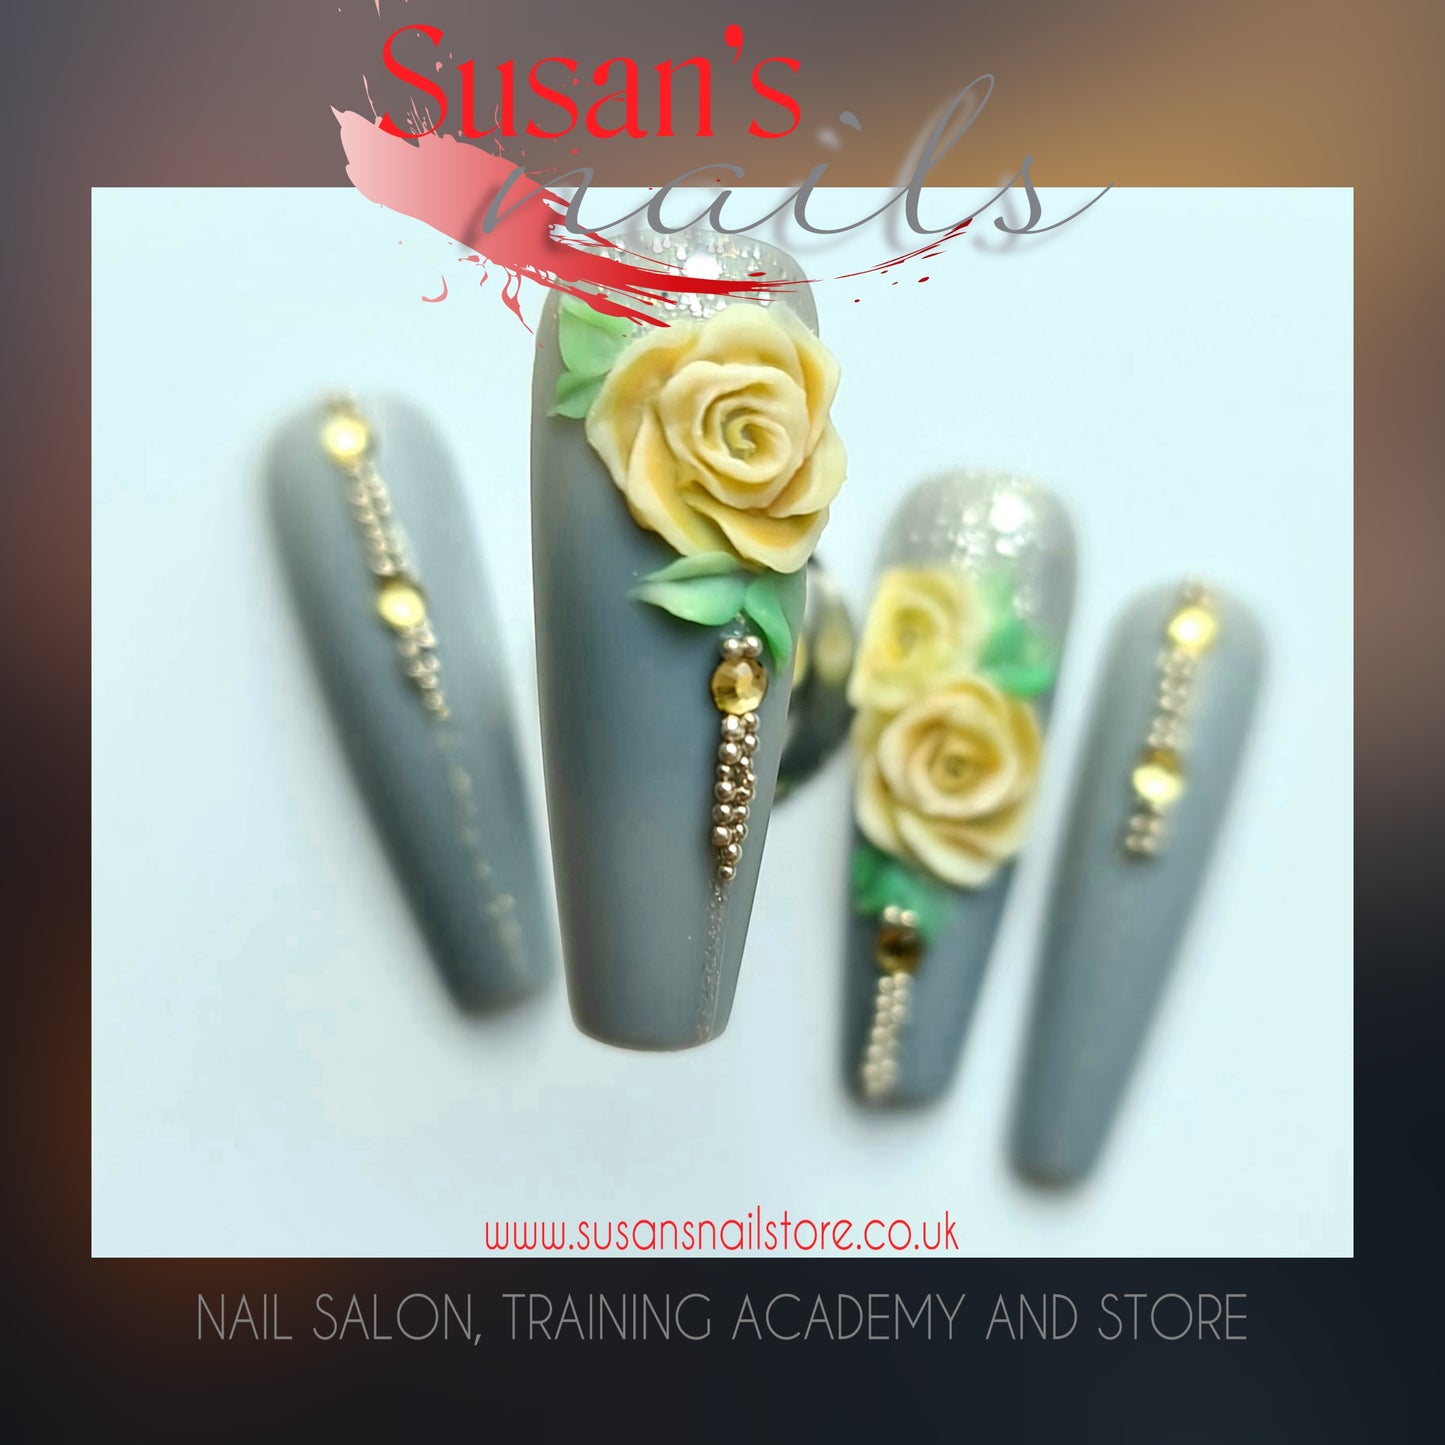 Illuminating 21 Nail Art Course - online - lesson5: 3D roses with gel